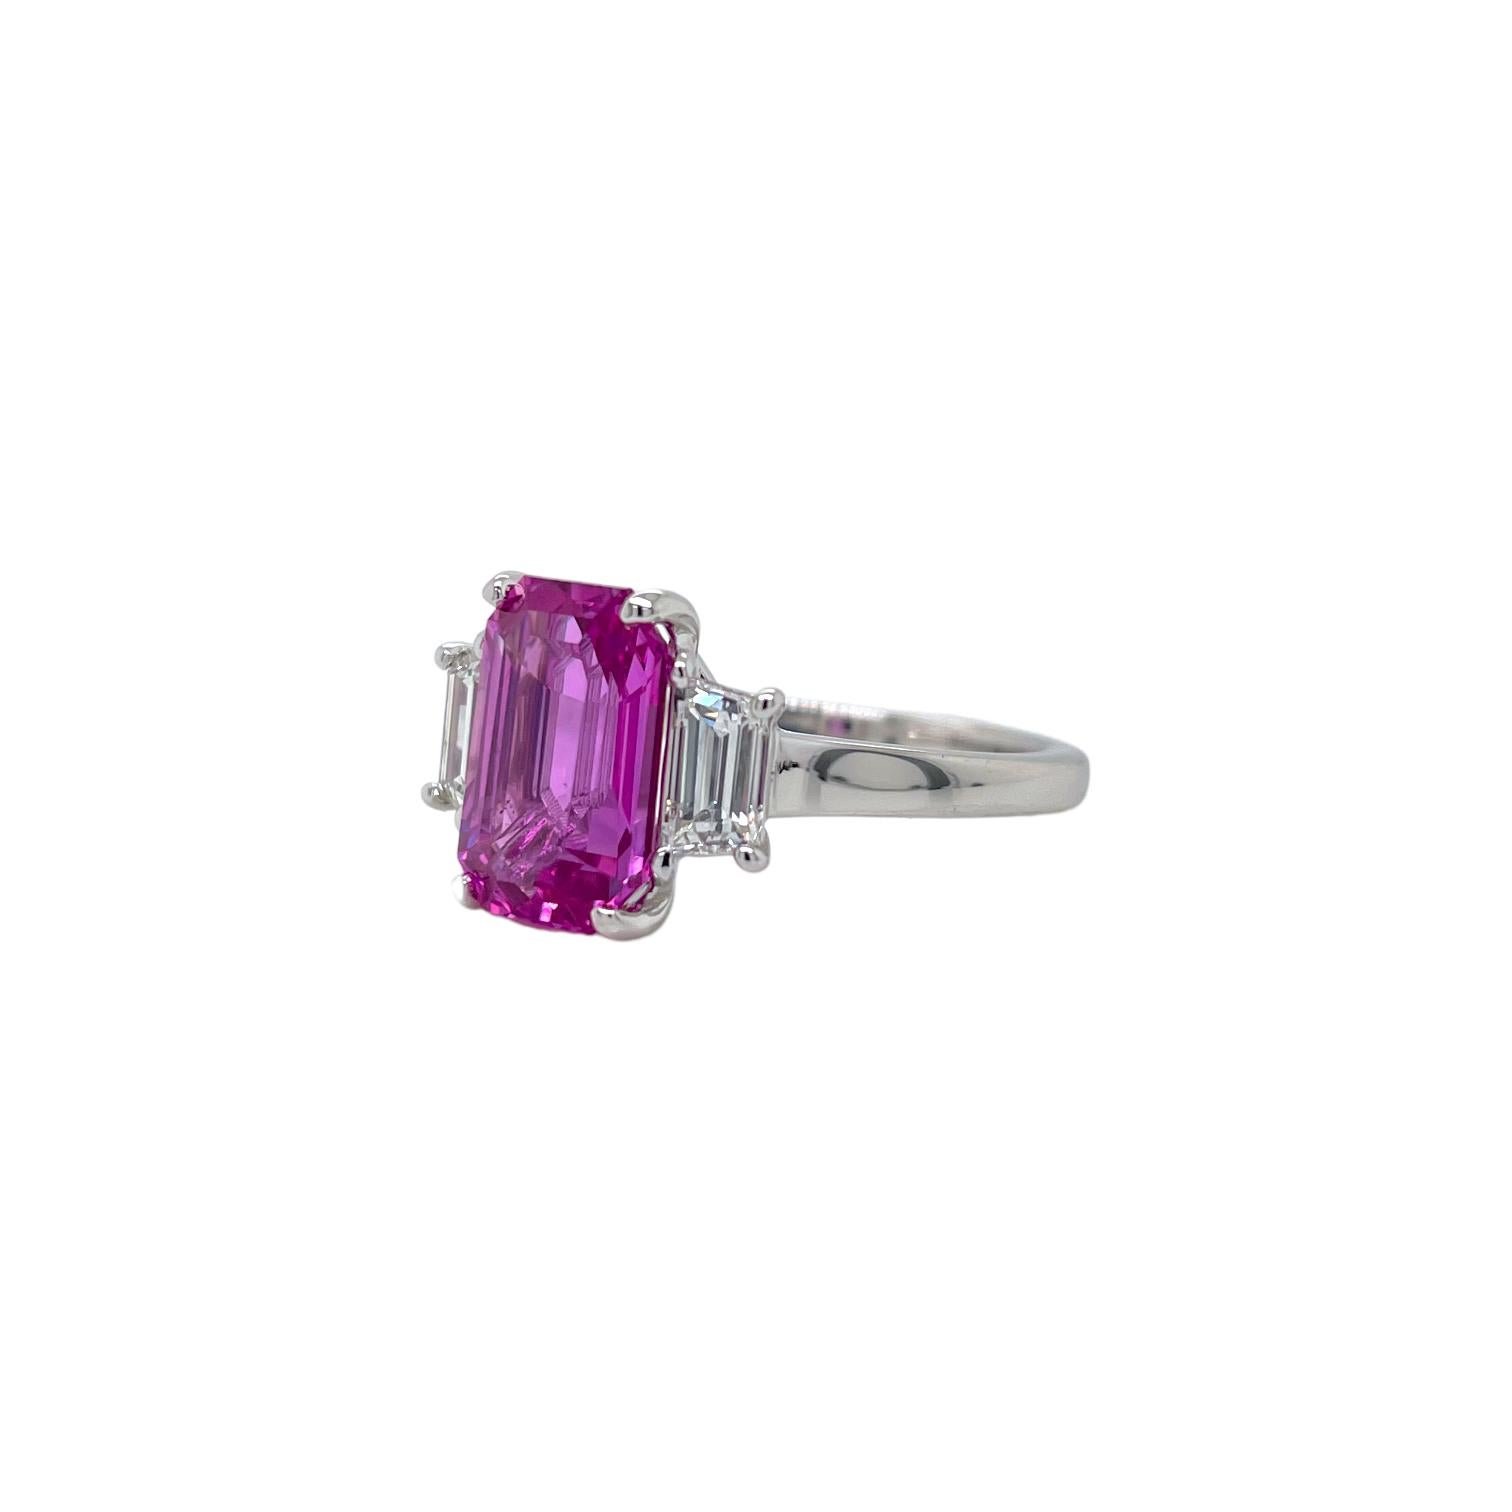 Ring contains one GIA certified no heat emerald cut pink sapphire 3.55ct and two side step cut trapezoid diamonds 0.68tcw. Pink Sapphire and diamonds are mounted in a handmade basket prong setting with a 2mm wide shank. Diamonds are F in color and